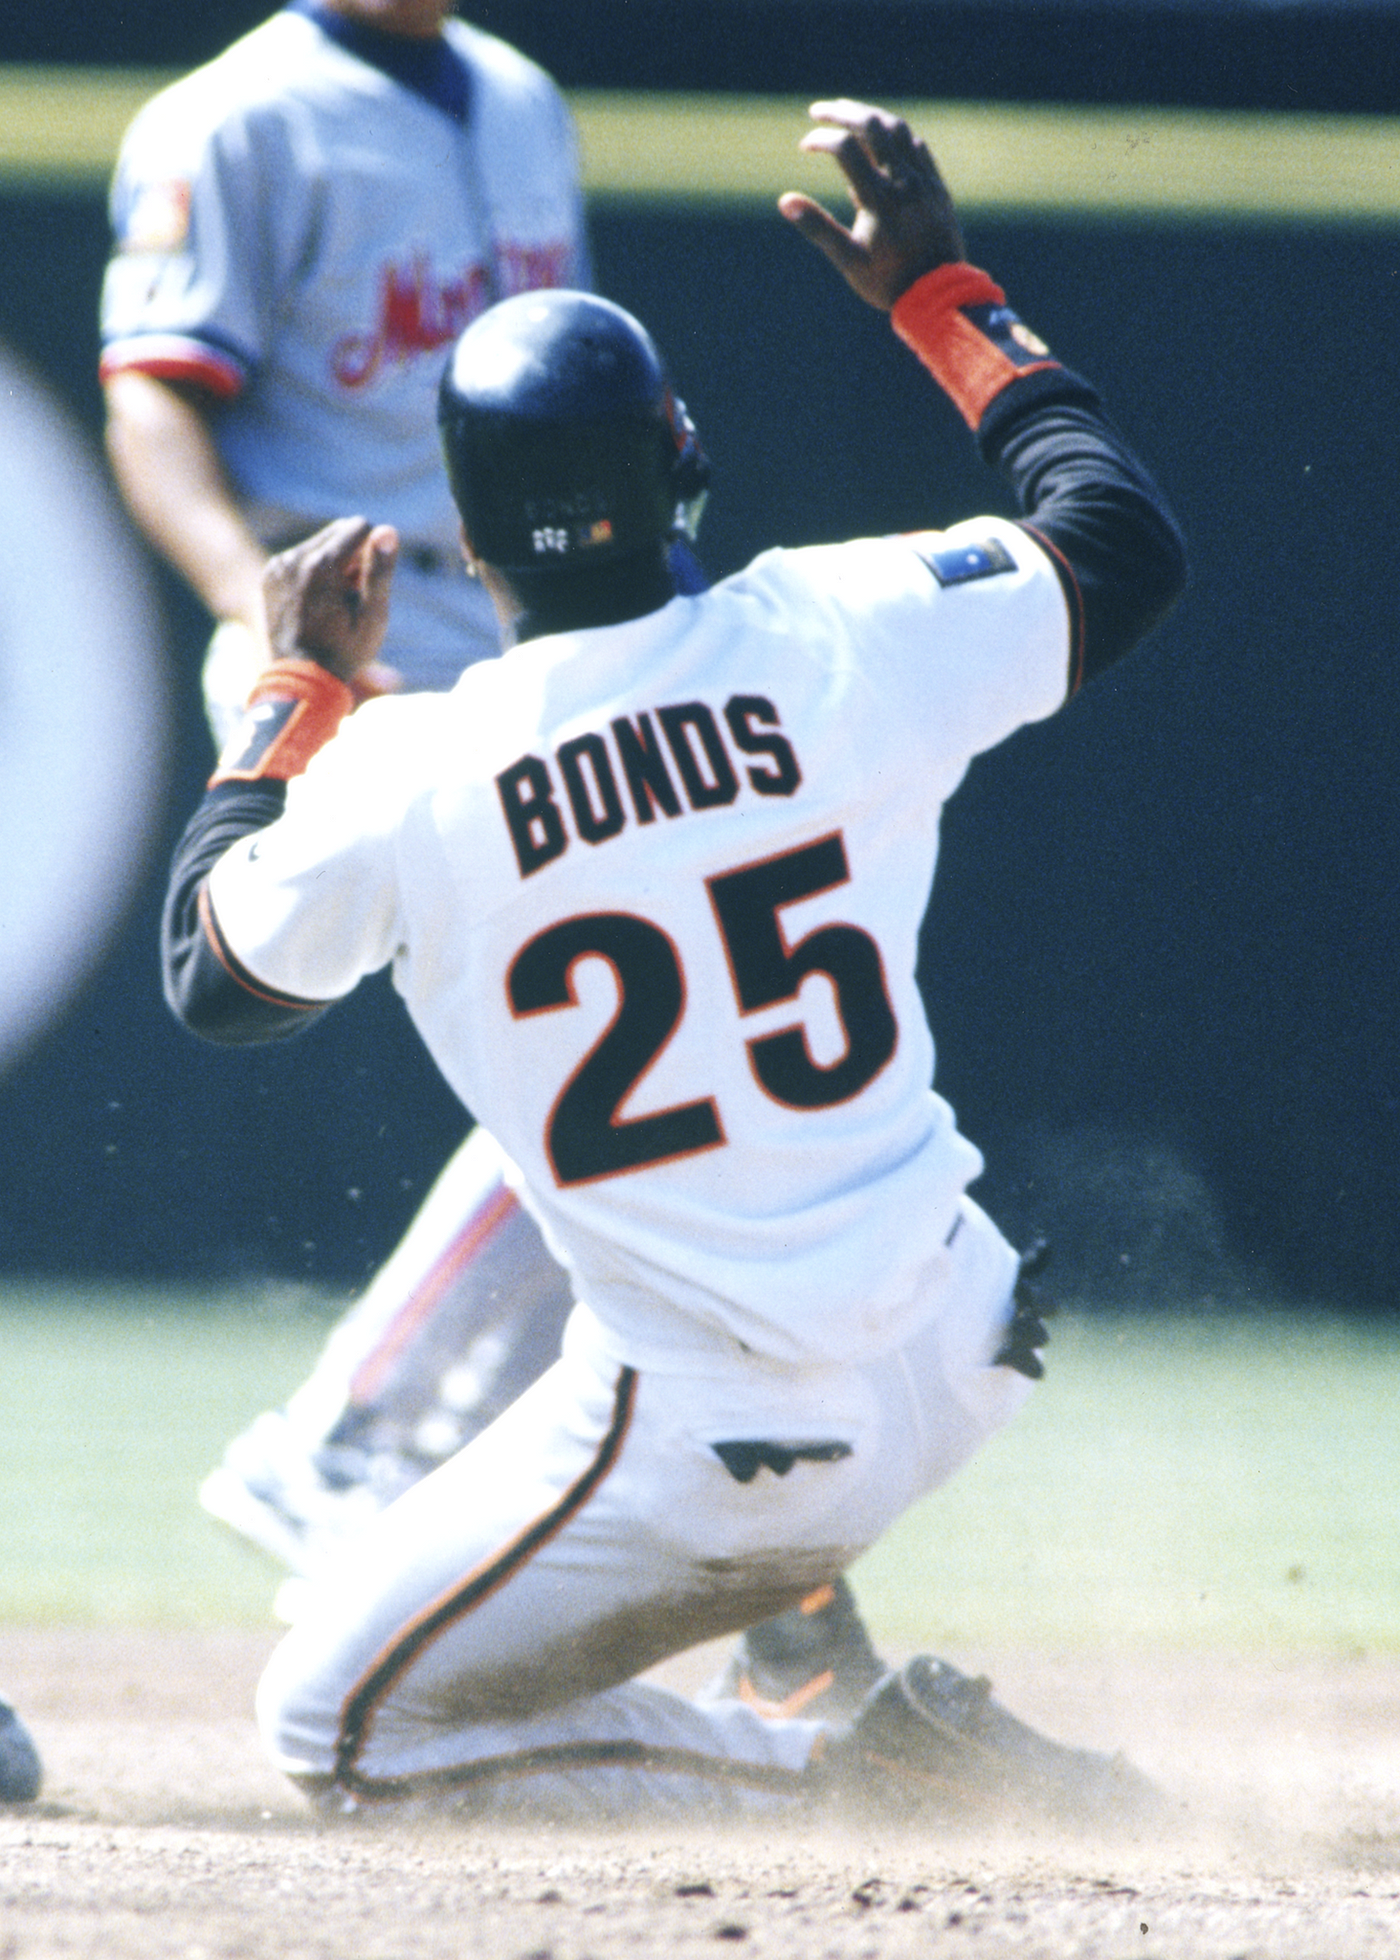 Pictures: Barry Bonds through the years - Los Angeles Times